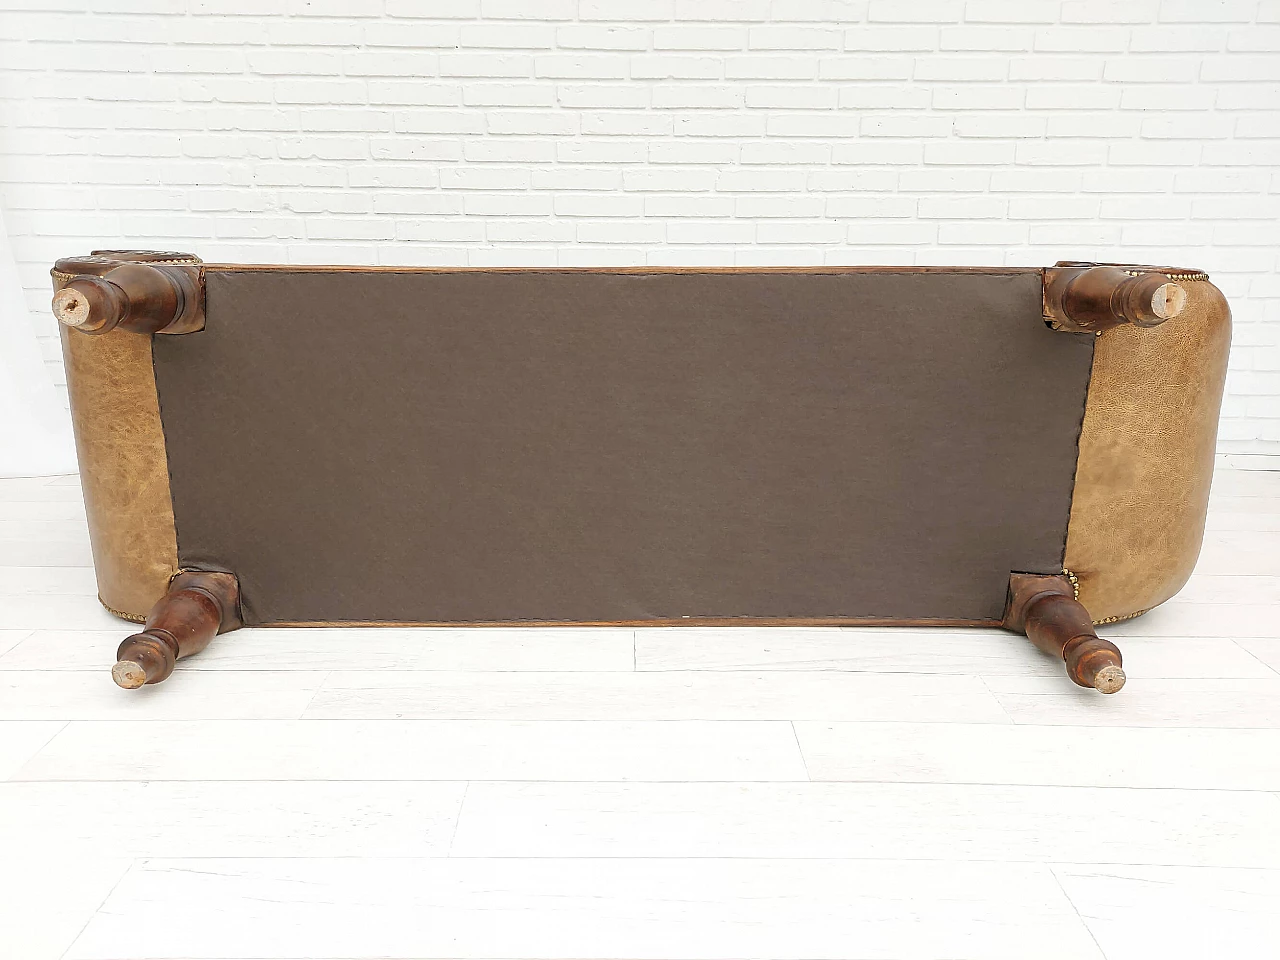 Danish antique chaise longue, early 20th century 1142184